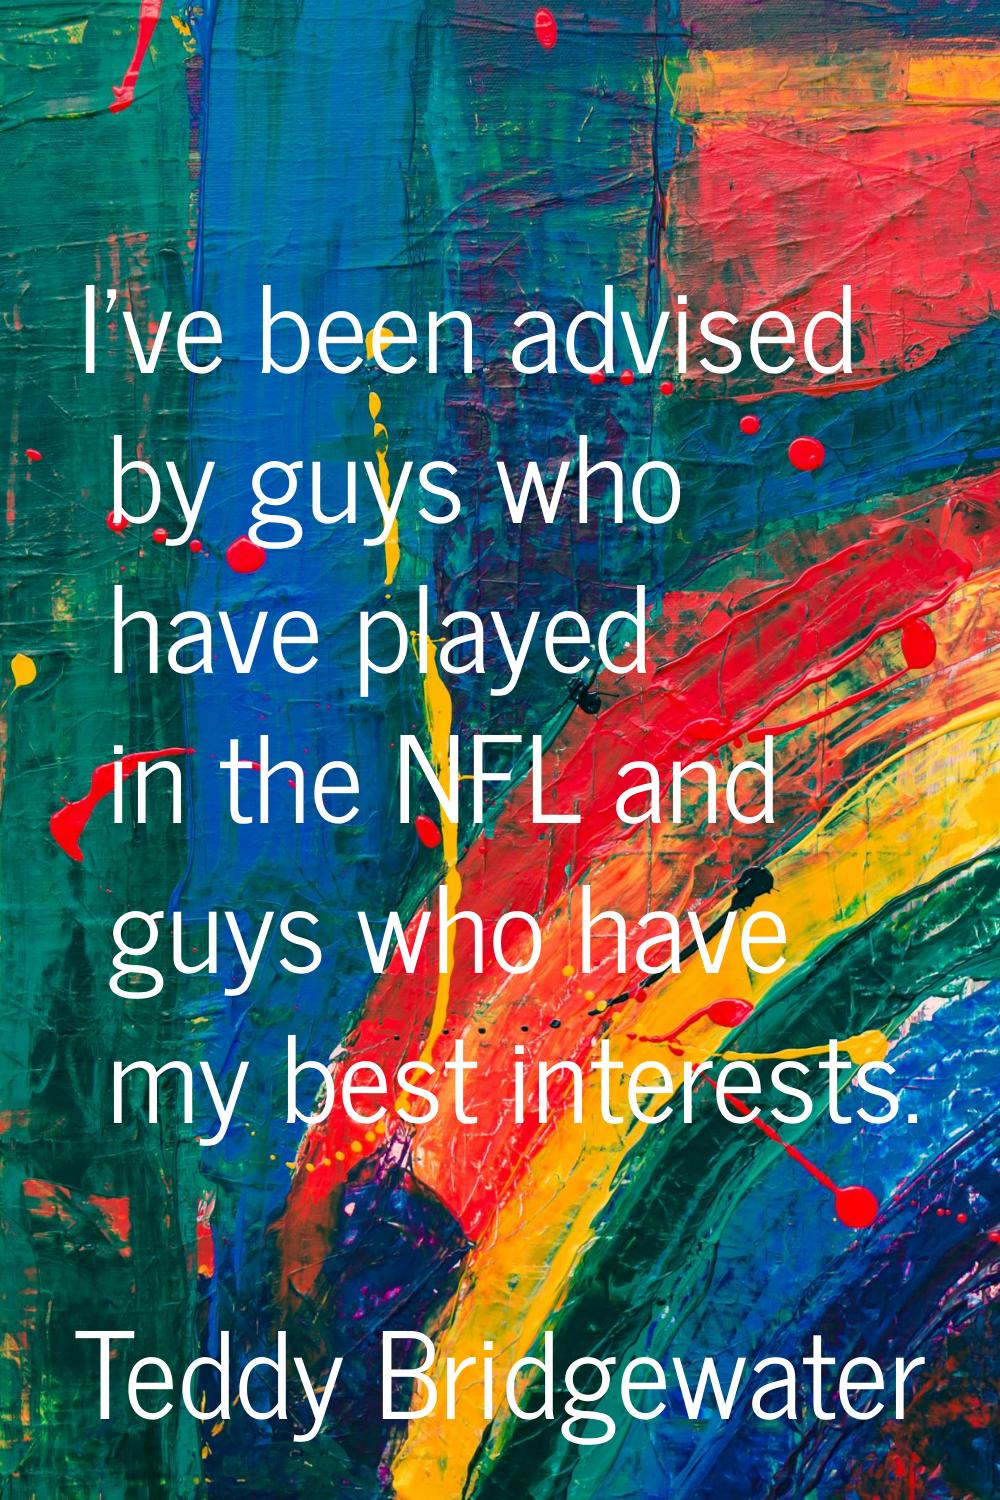 I've been advised by guys who have played in the NFL and guys who have my best interests.